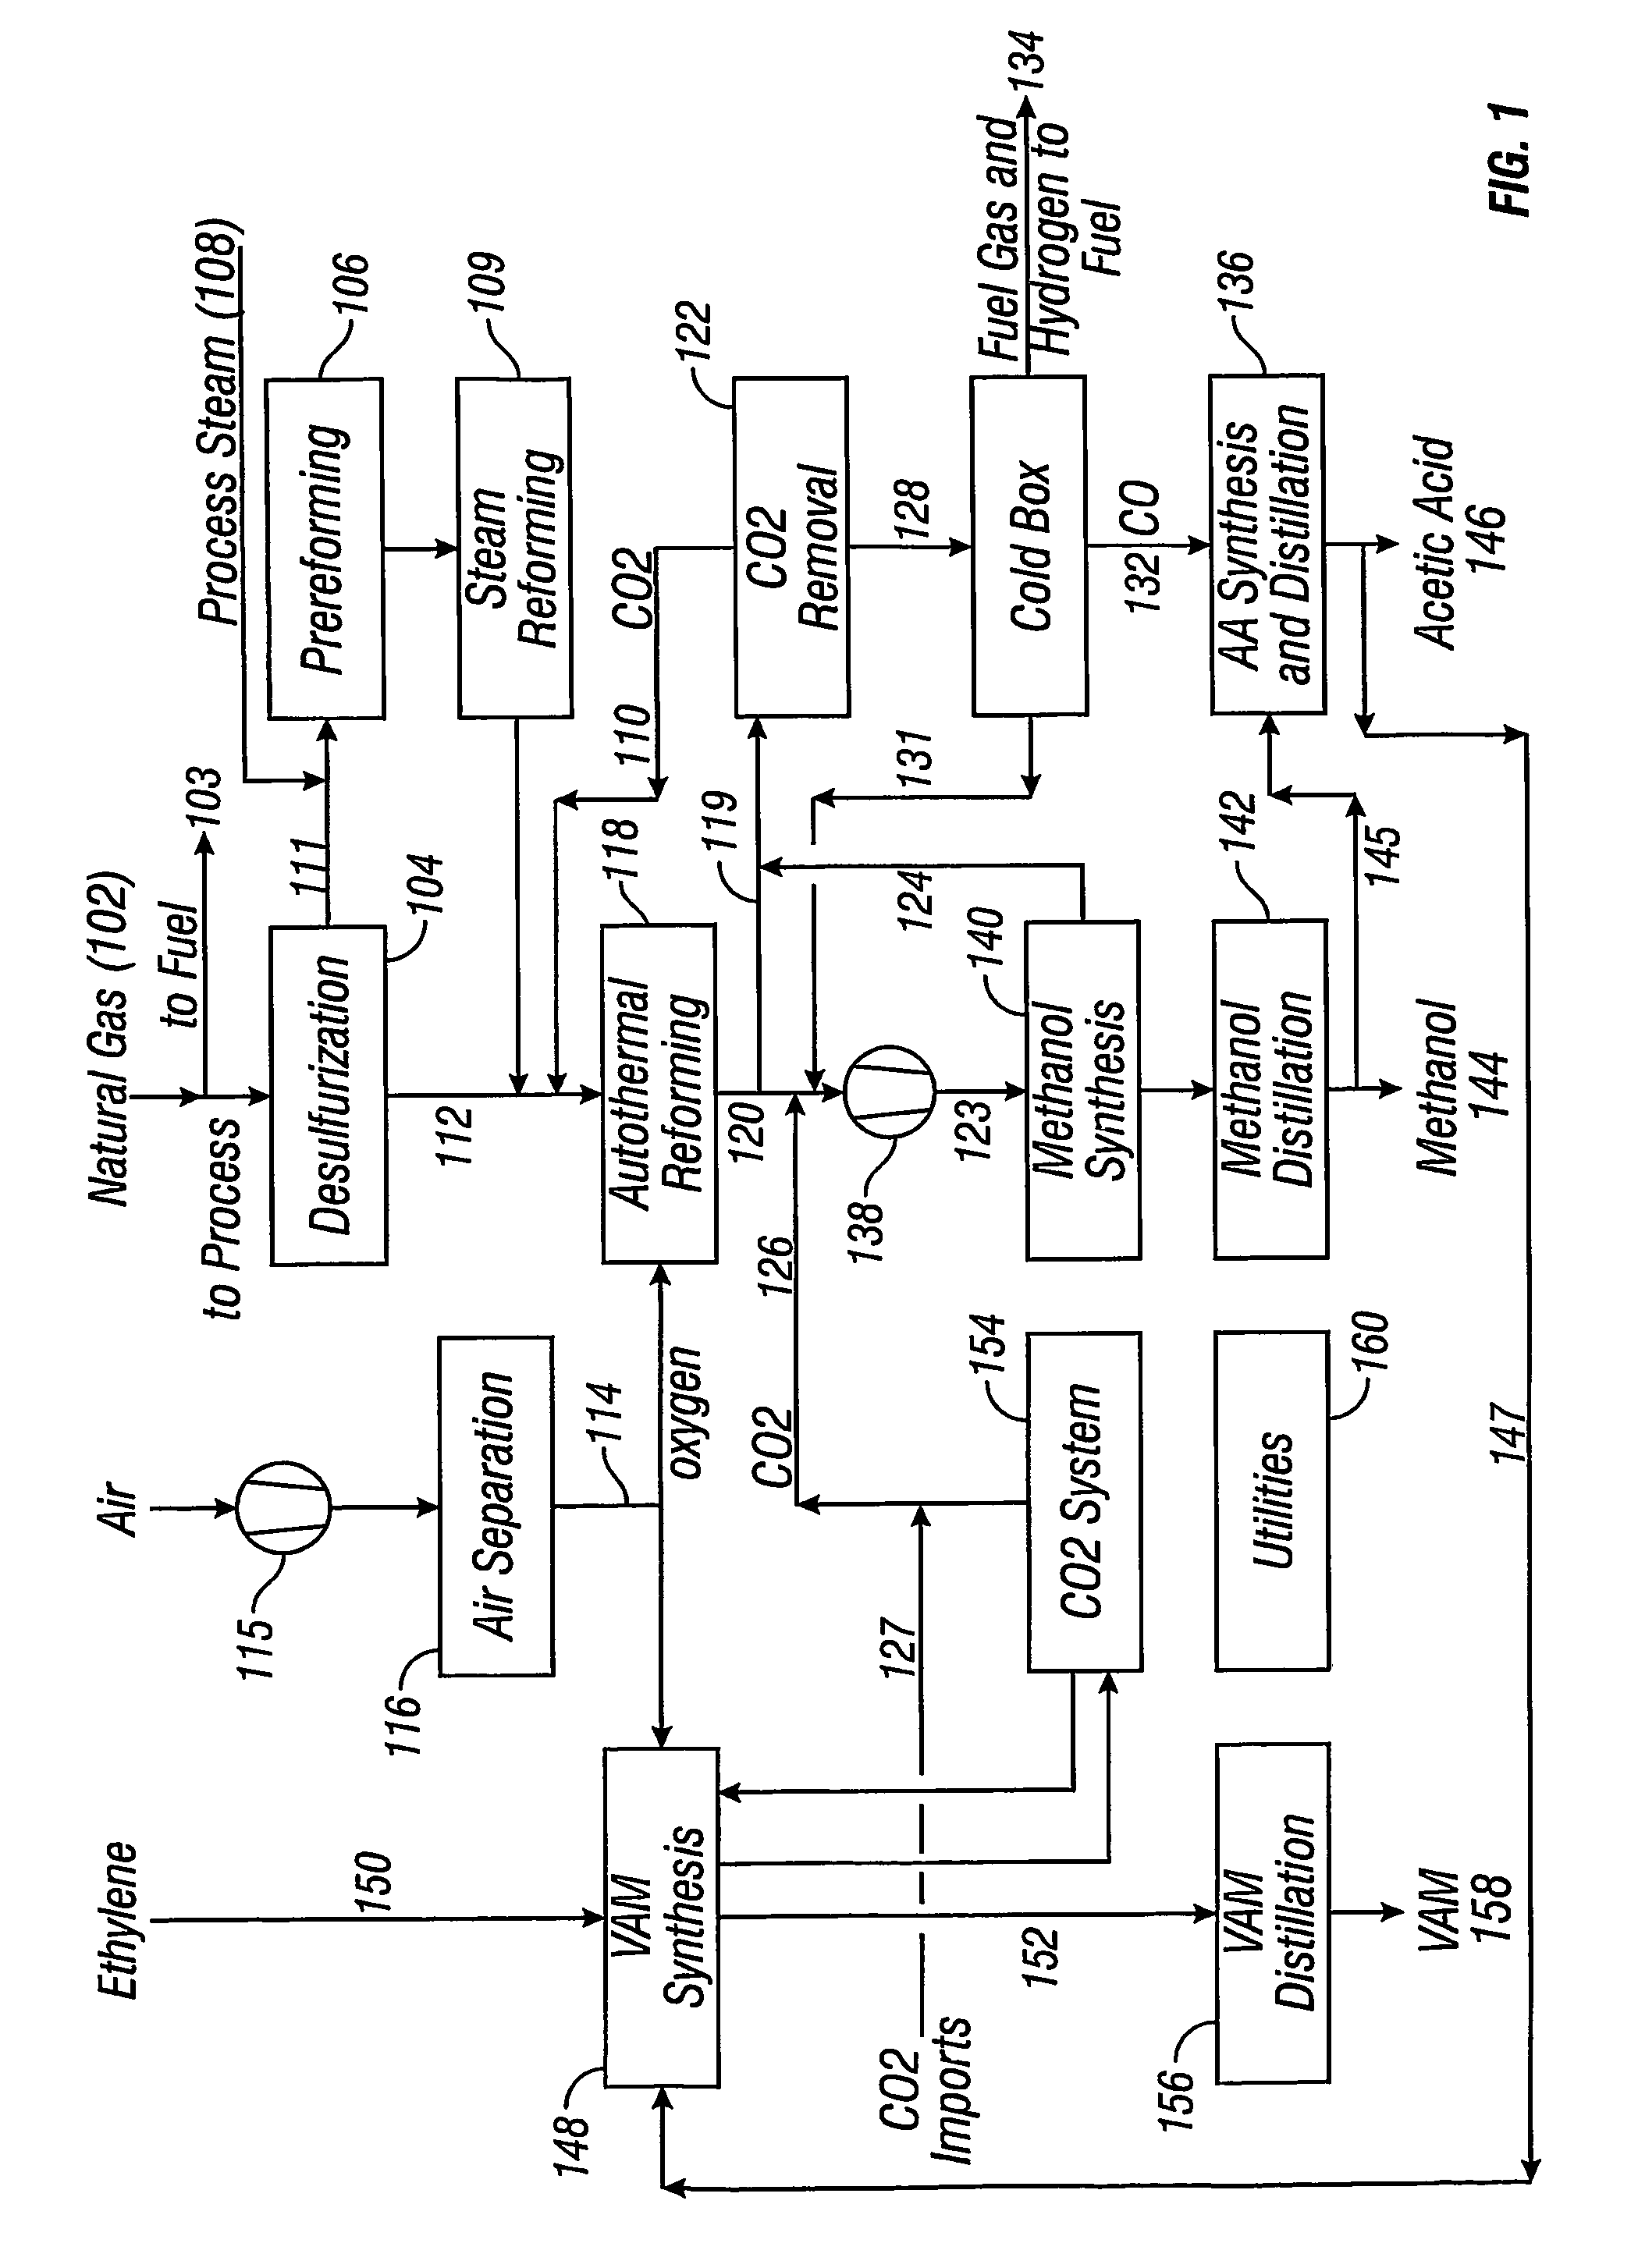 Integrated process for acetic acid and methanol